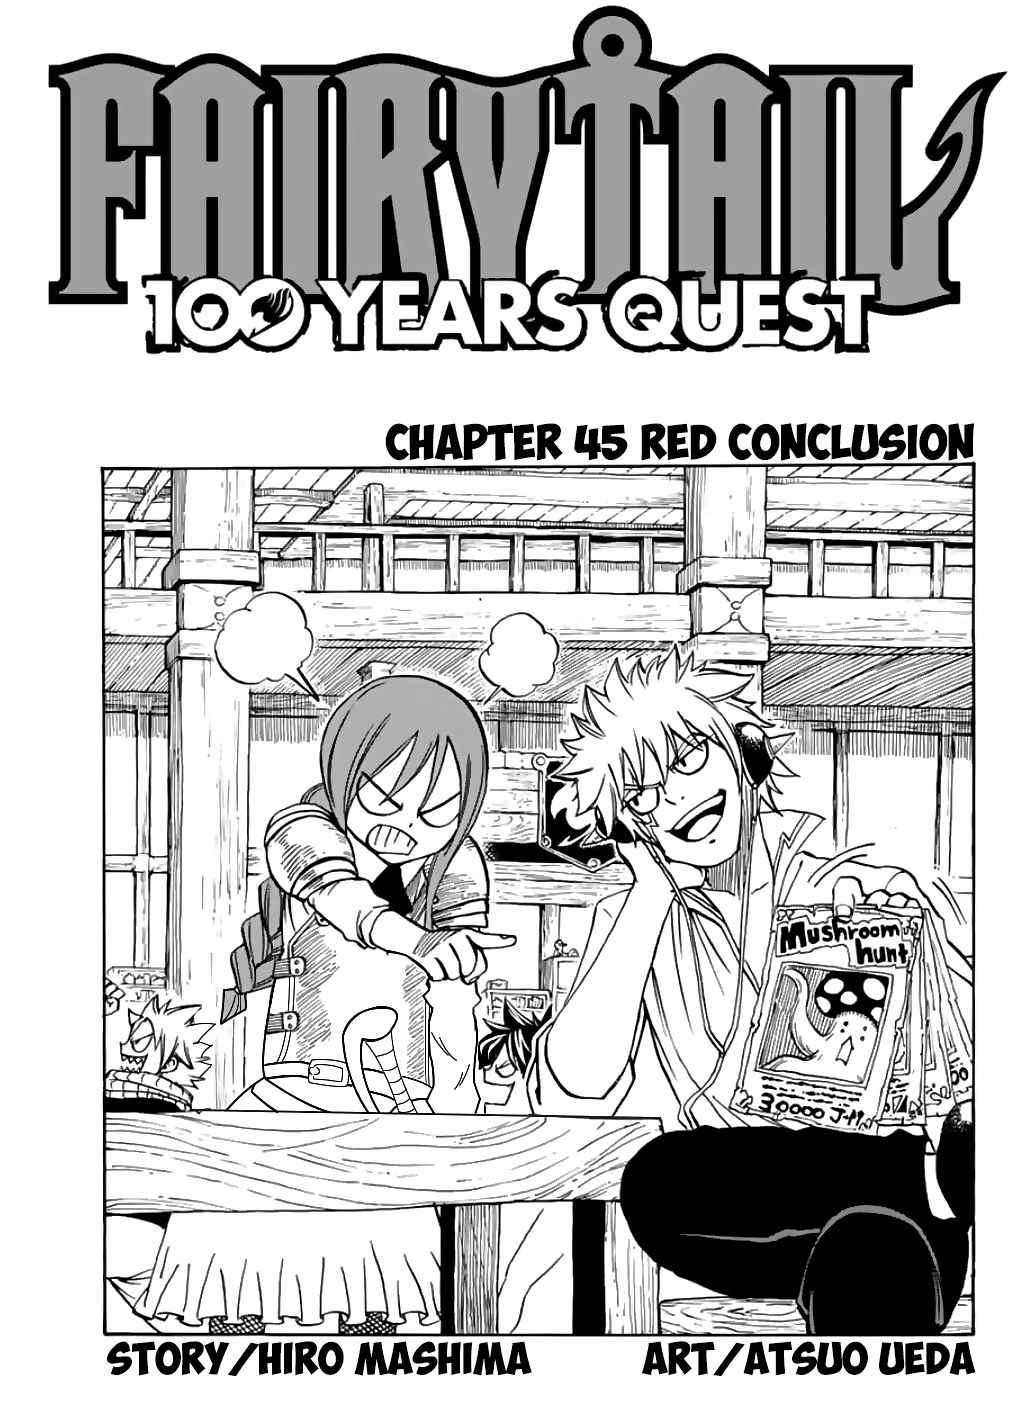 Fairy Tail: 100 Years Quest Ch. 45 Red Conclusion